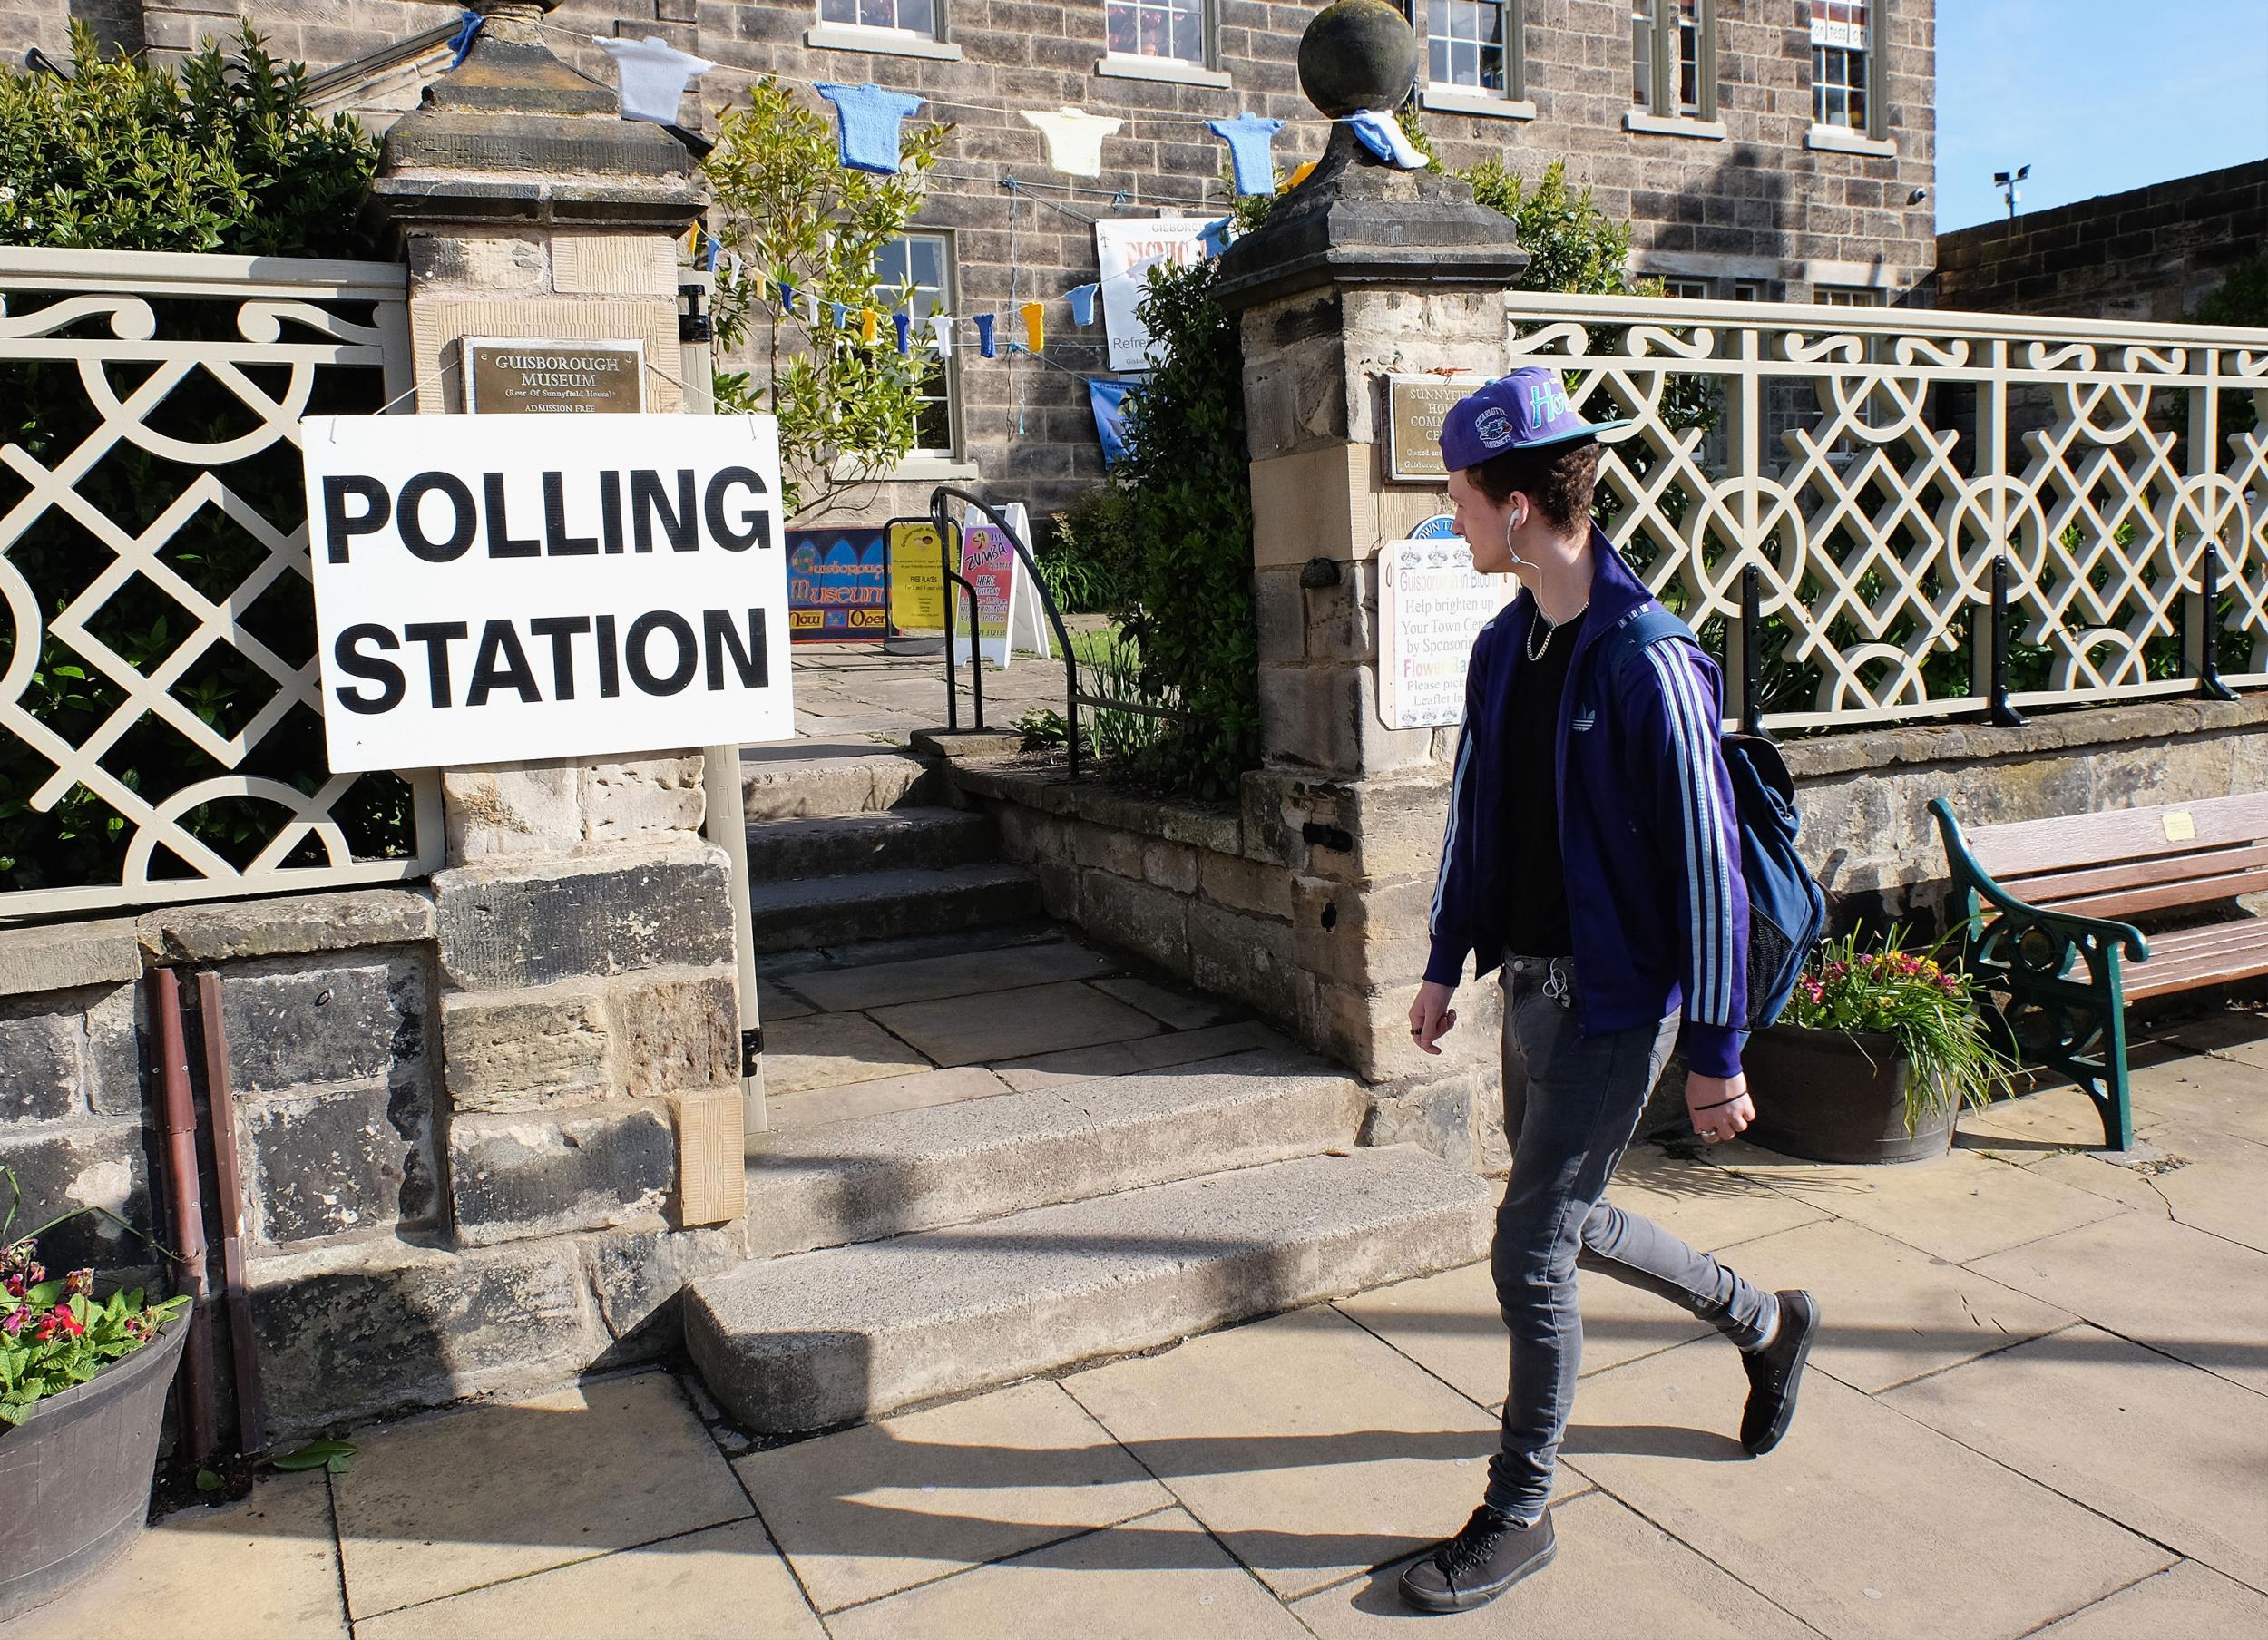 A man walks past a polling station in Guisborough on 7 May 2015